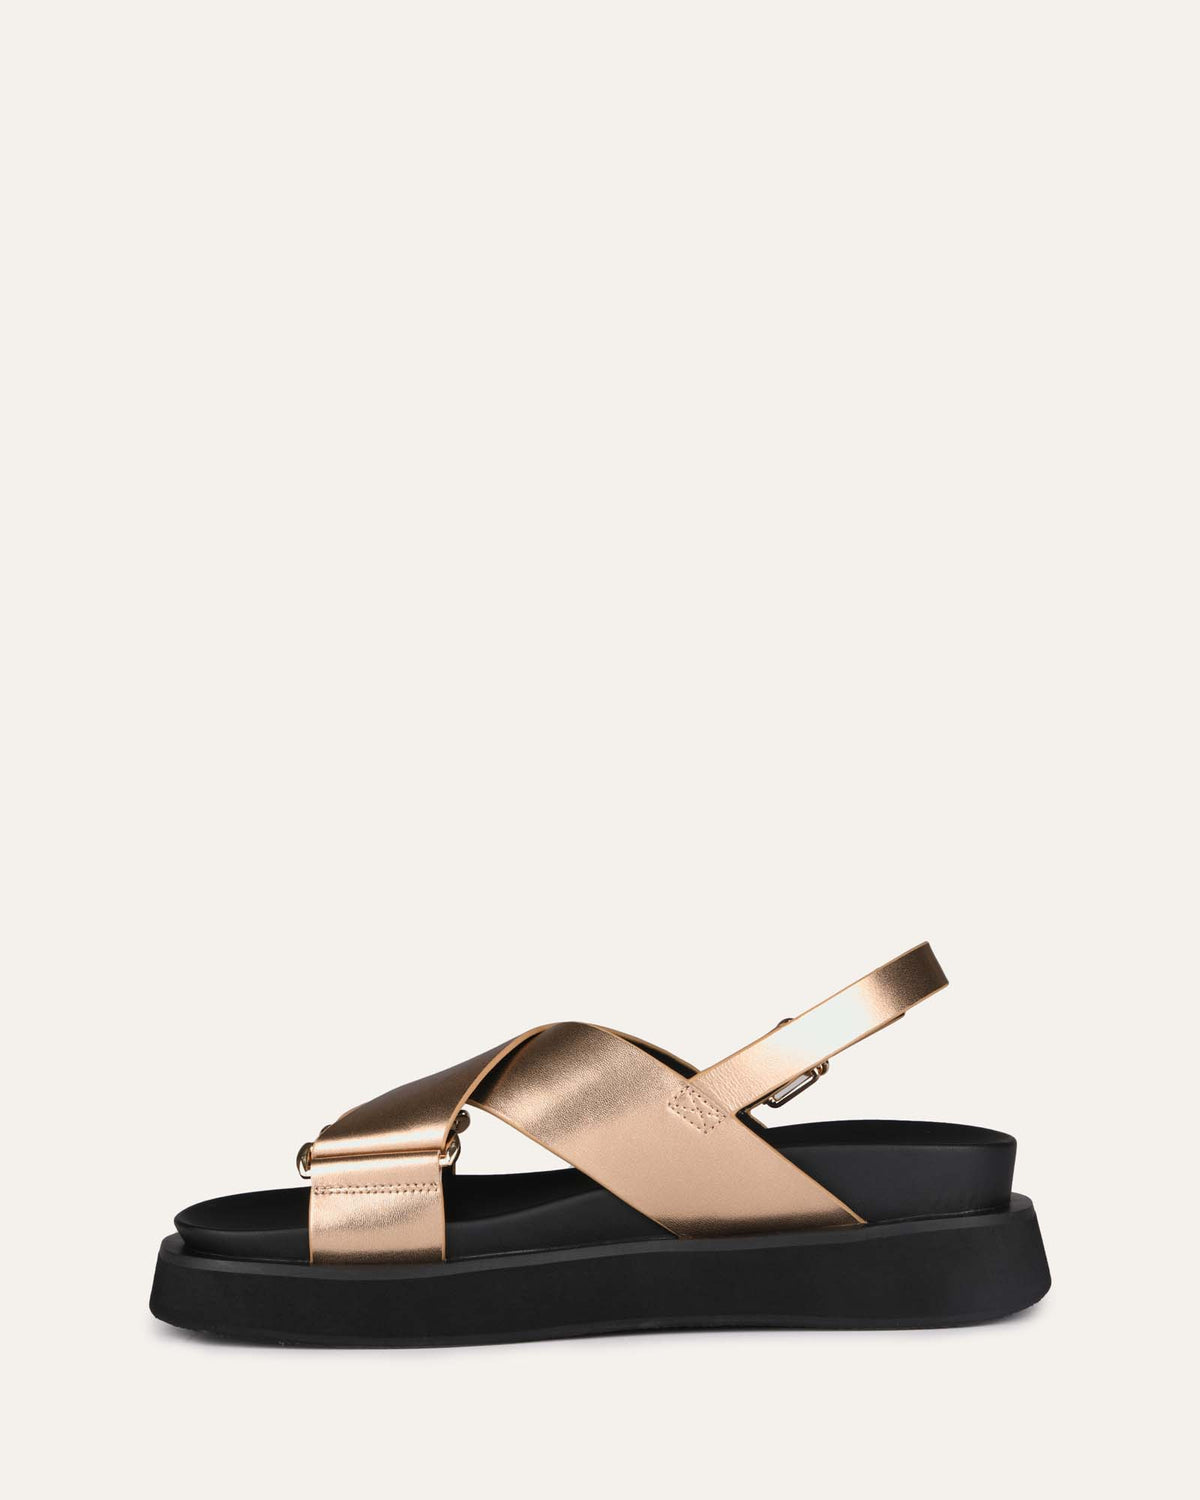 MARLEY FLAT SANDALS GOLD LEATHER